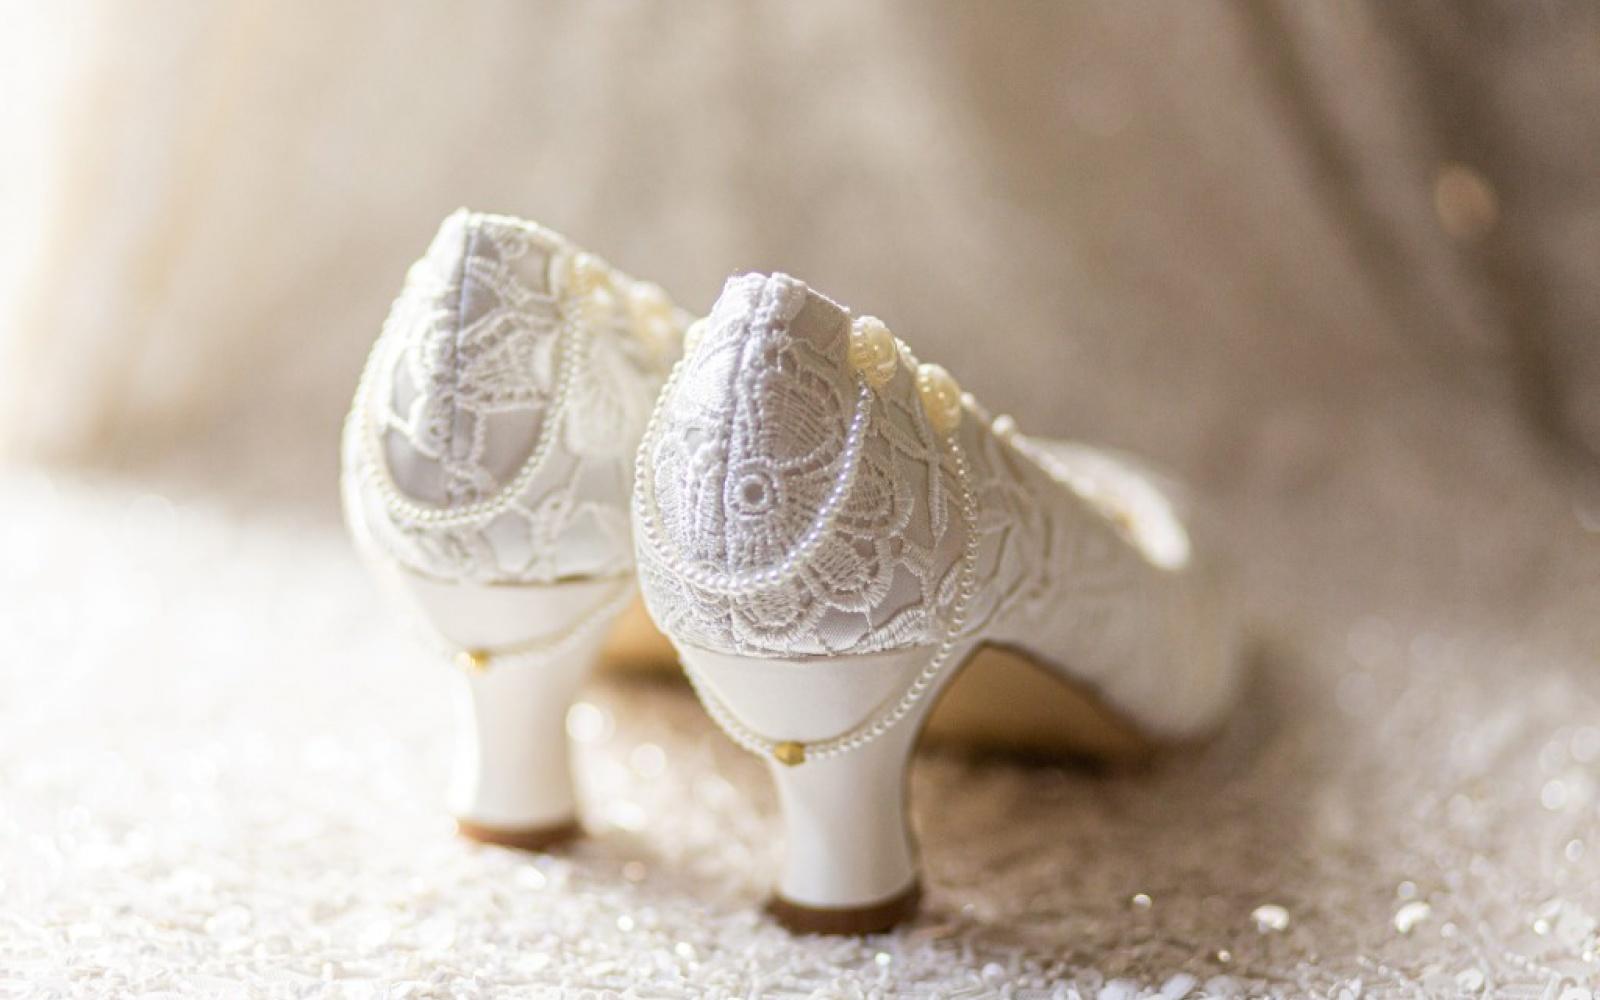 Autumn Ombre Elegance wedding inspiration Styled Shoot Bear Hotel Hungerford Dymond's Shoes & Accessories low heel beaded inspiration